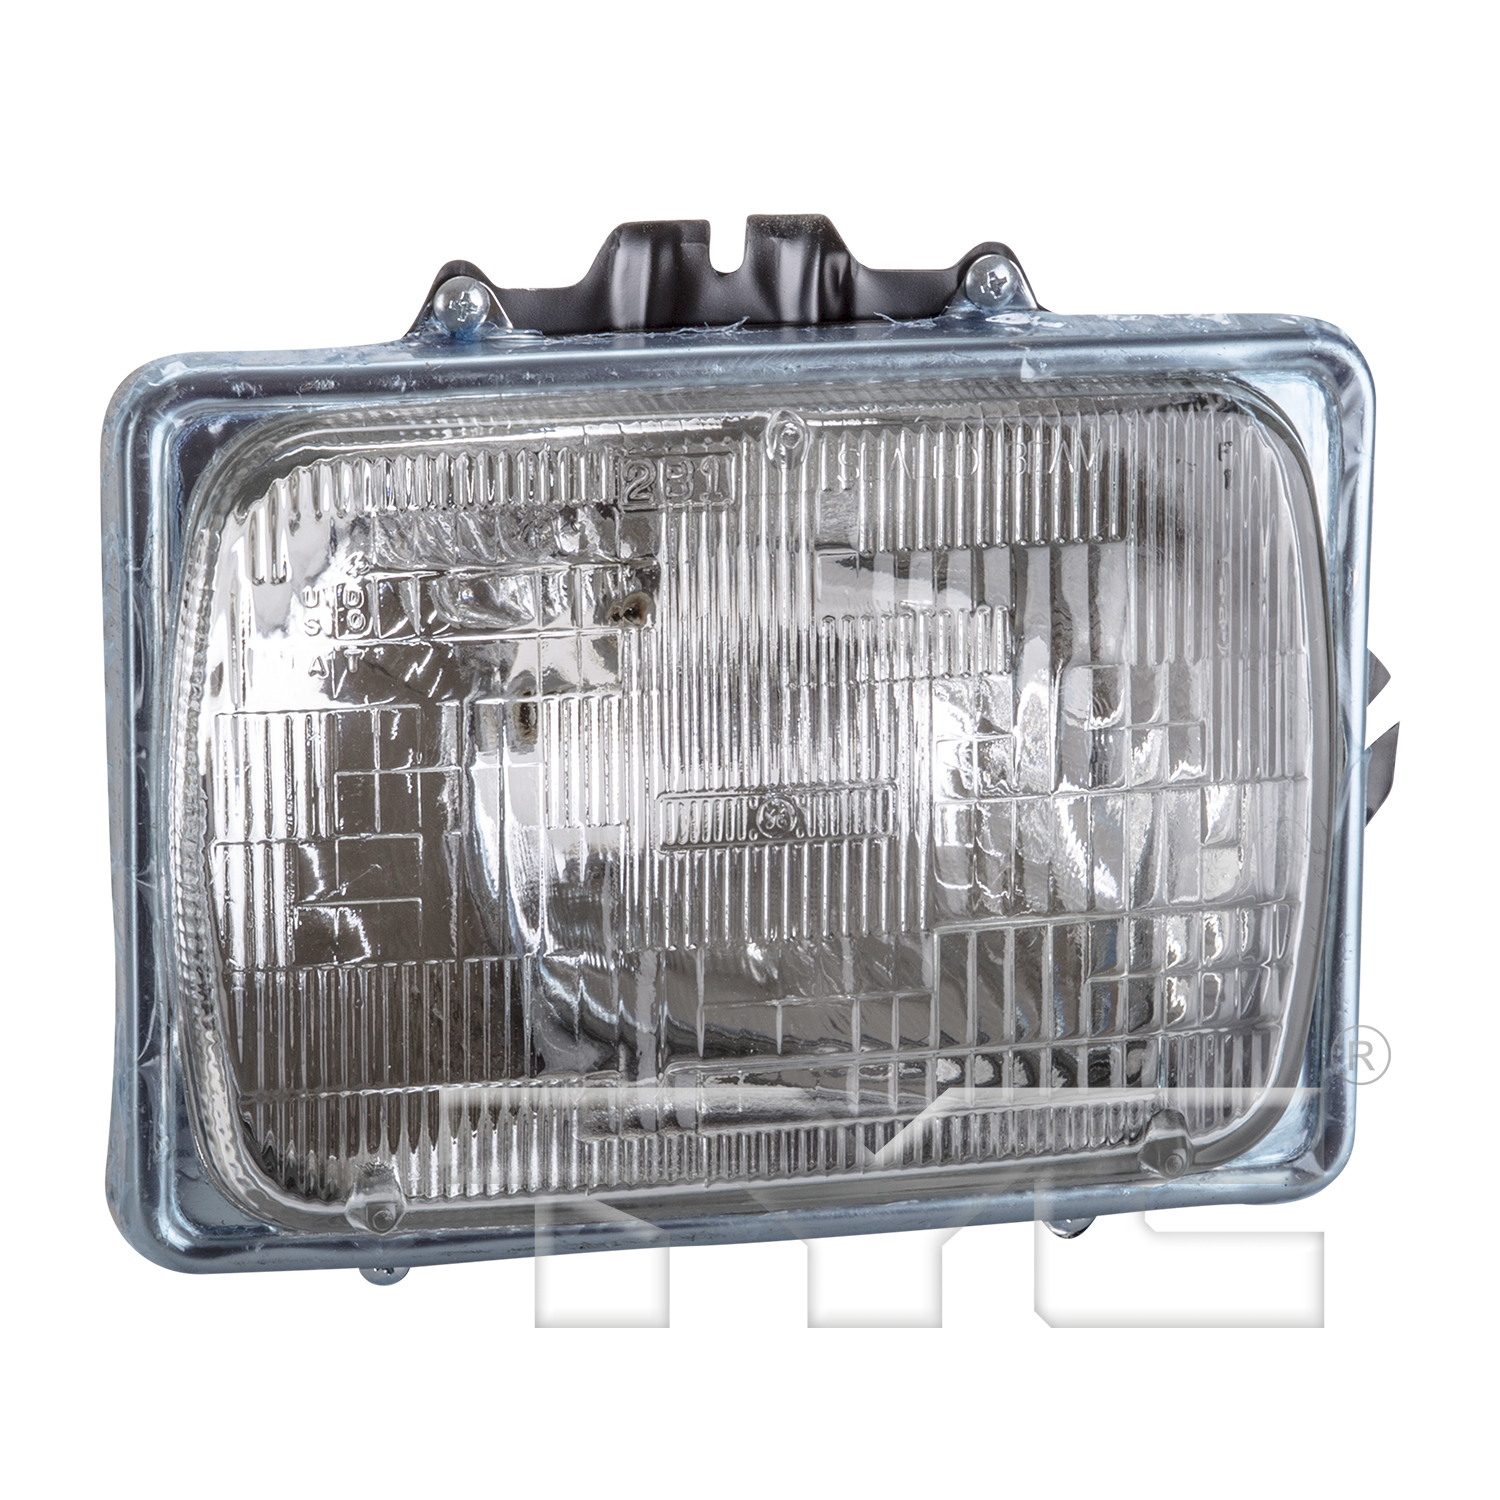 Aftermarket HEADLIGHTS for FORD - E-150, E-150,03-07,RT Headlamp assy sealed beam